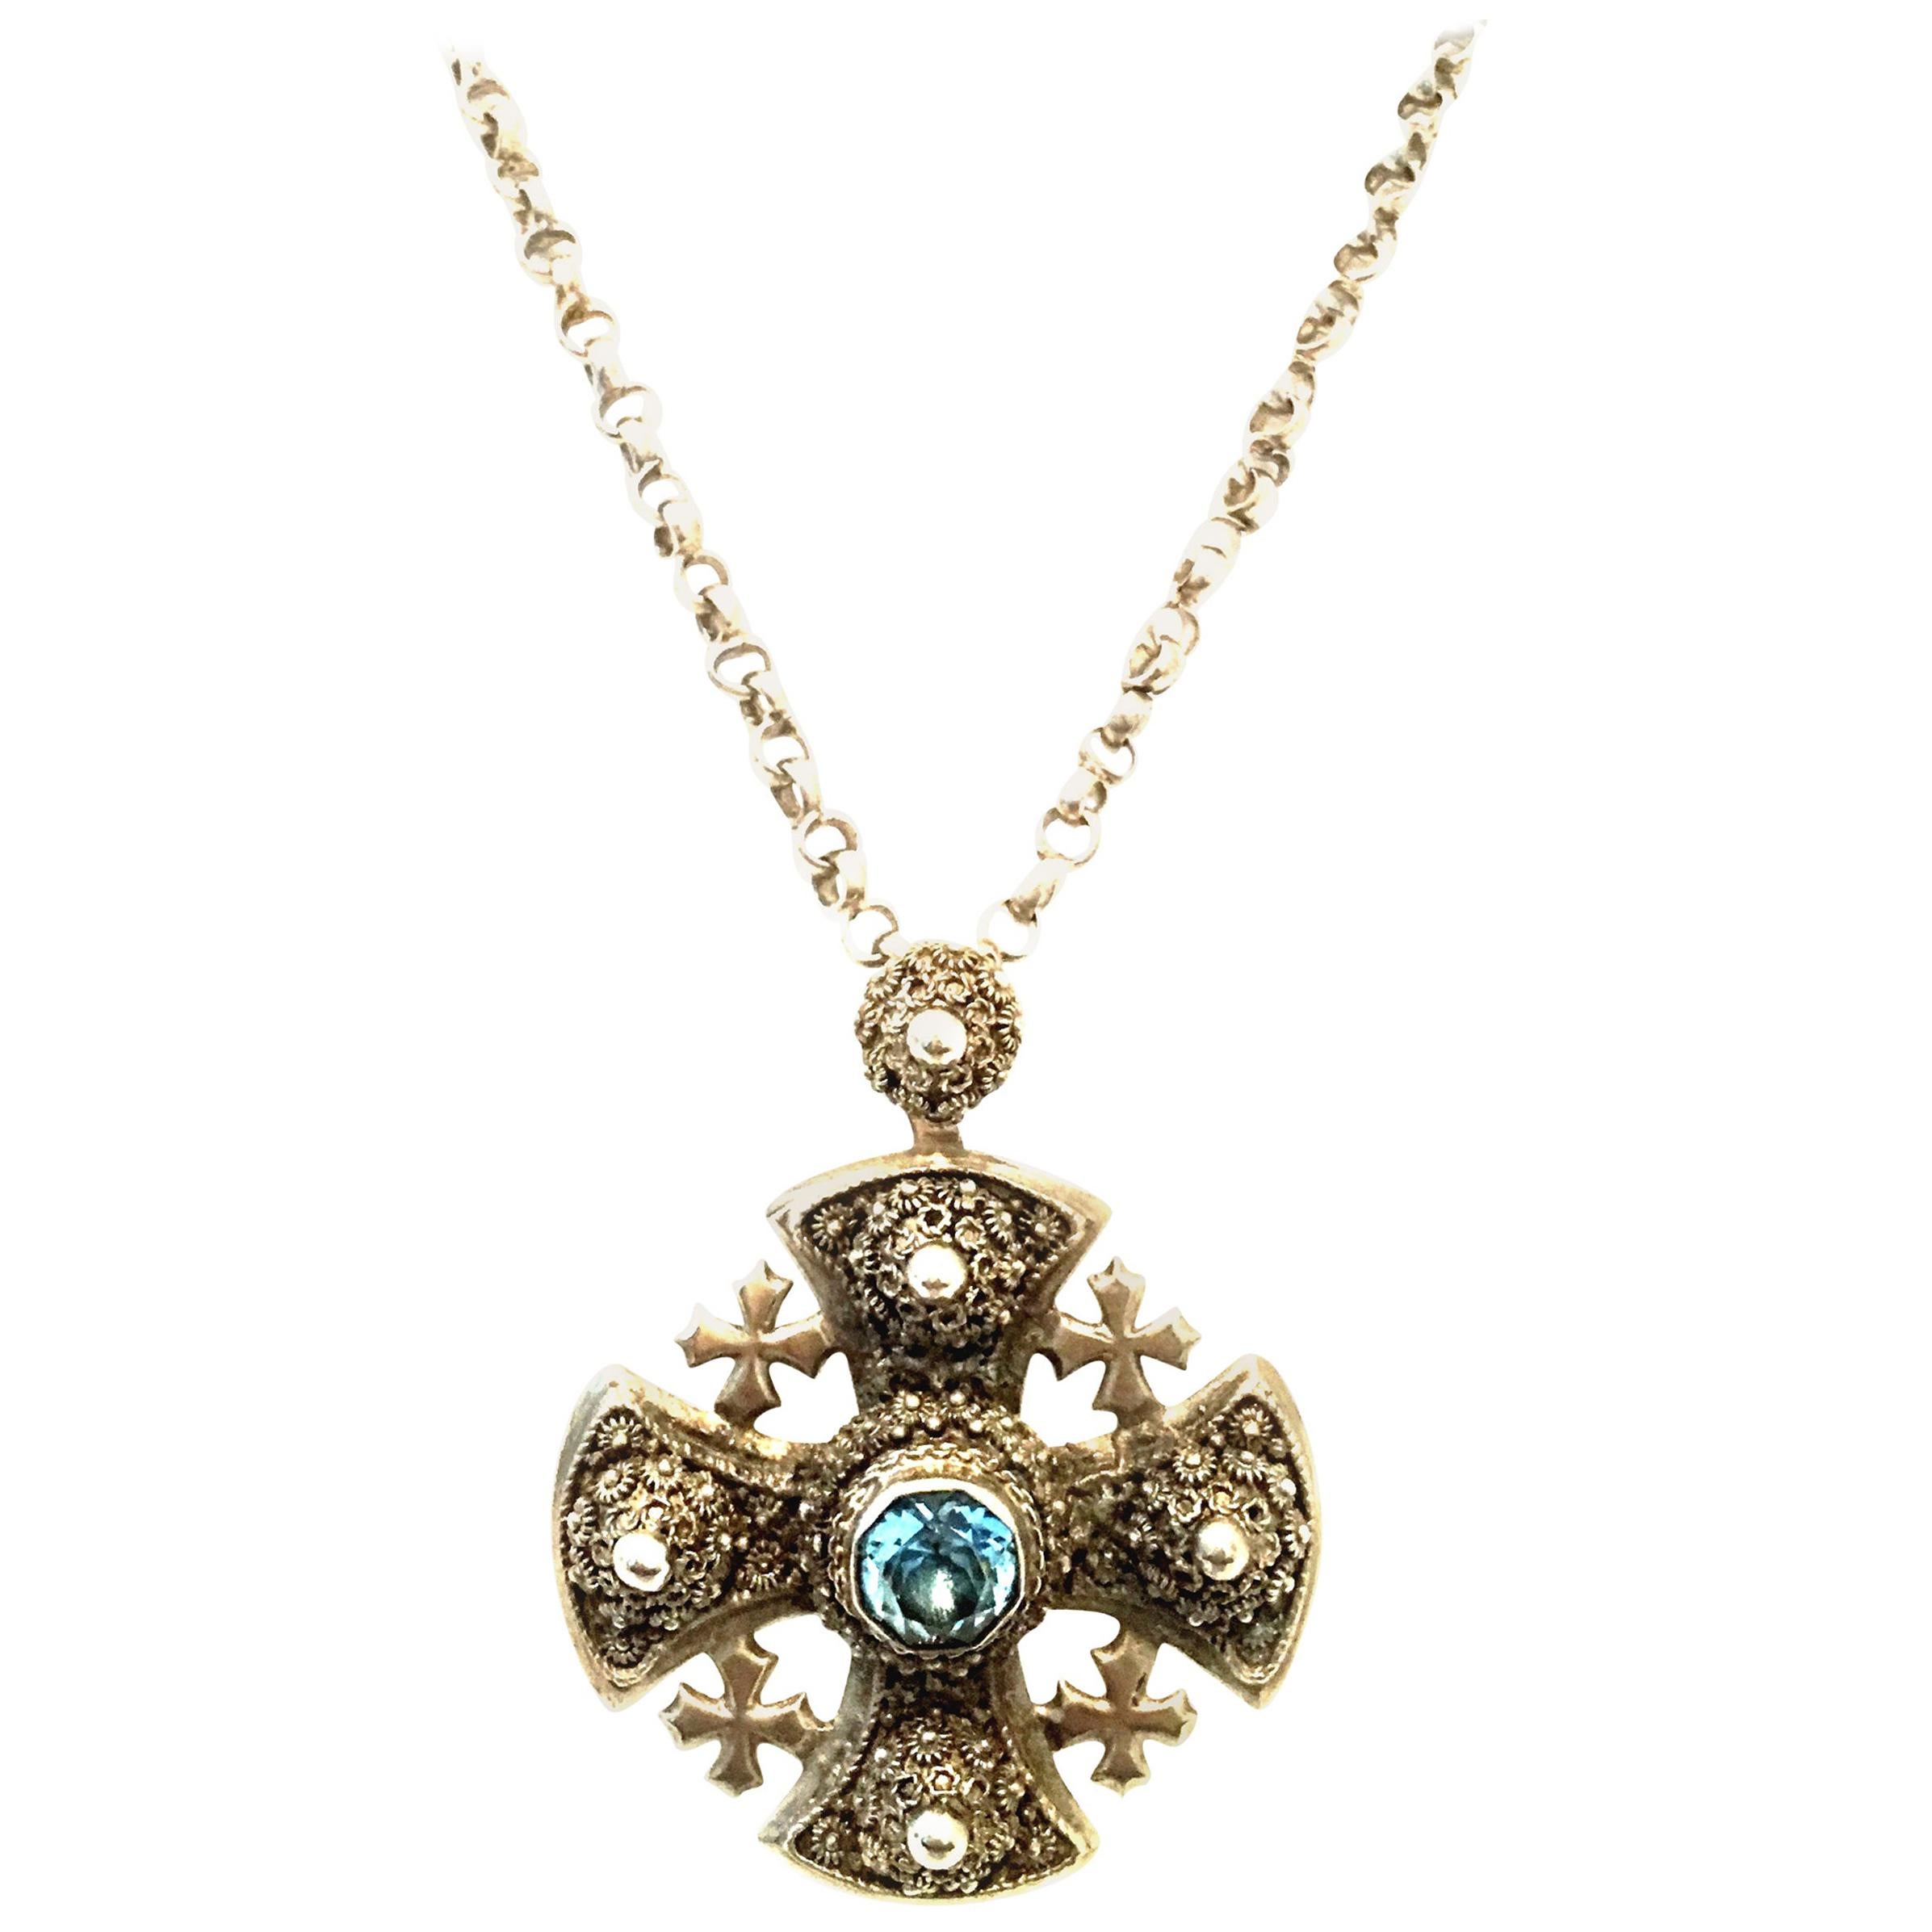 20th Century Byzantine Style Sterling Silver & Blue Topaz Maltese Cross Pendant Necklace. This finely crafted sterling silver chain link necklace with large sterling silver and blue topaz large reversible Maltese Cross pendant features etched,